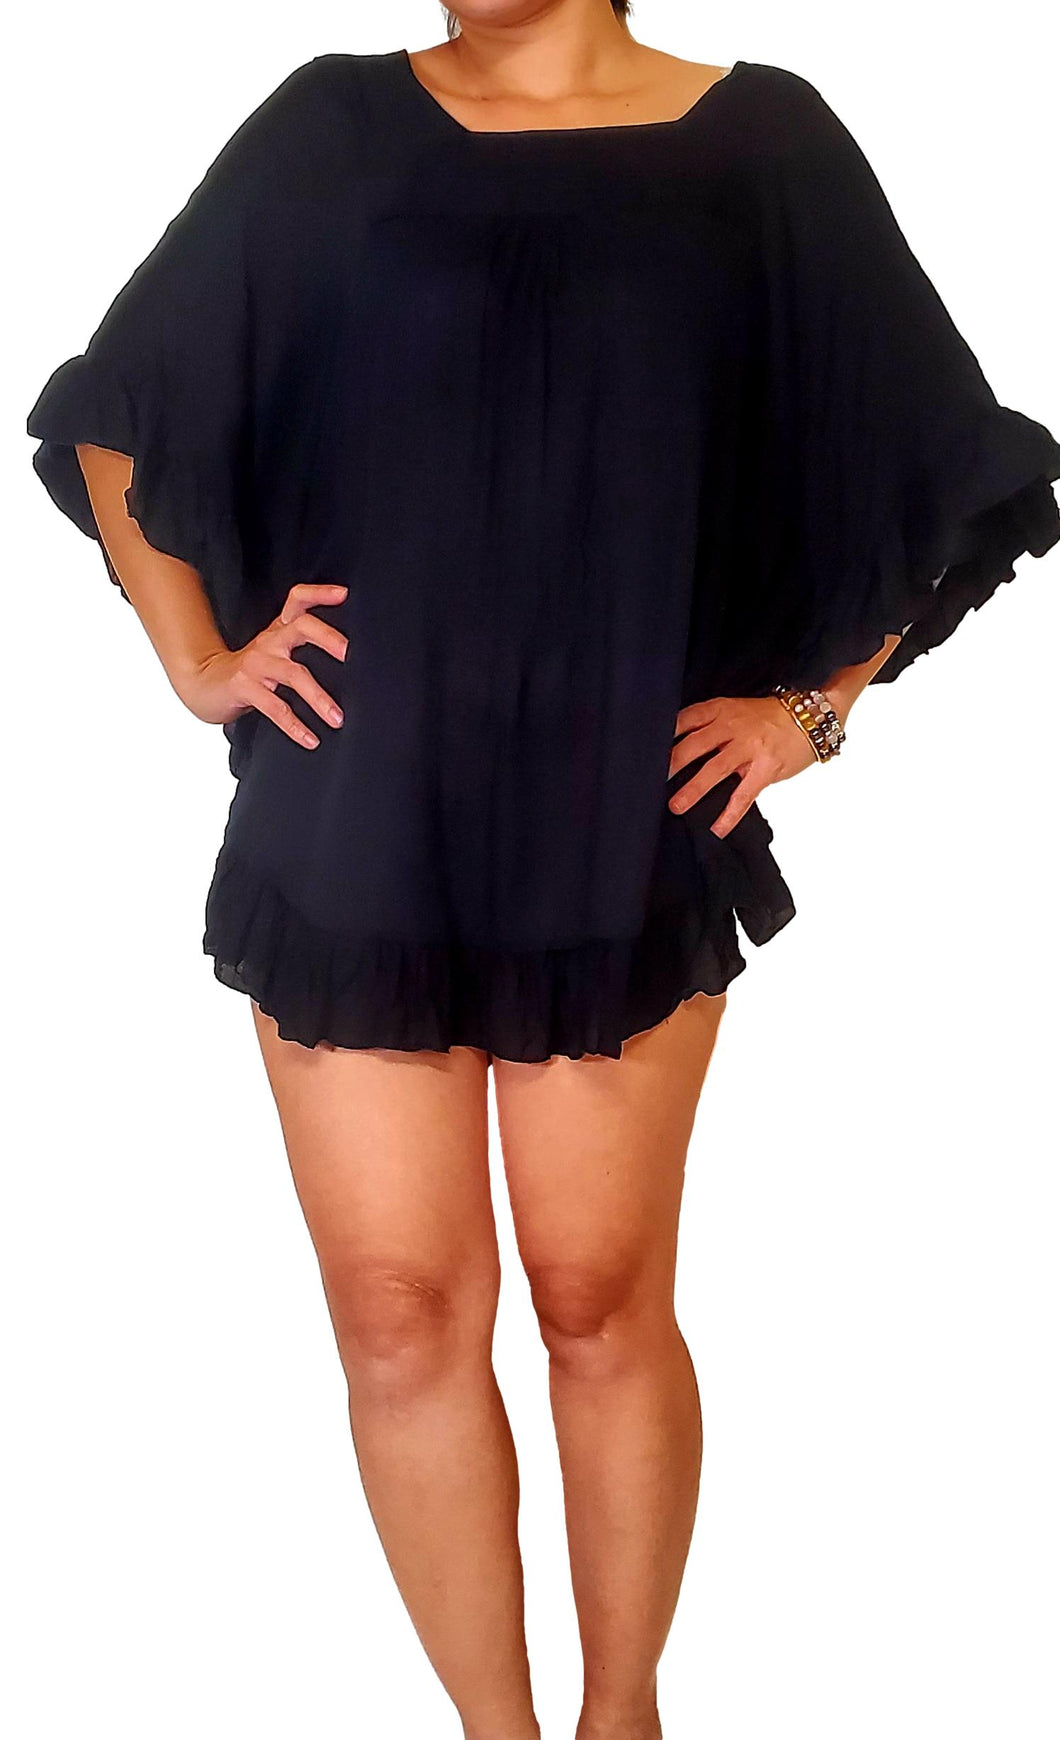 Ruffle Cover-Up - Solid Black